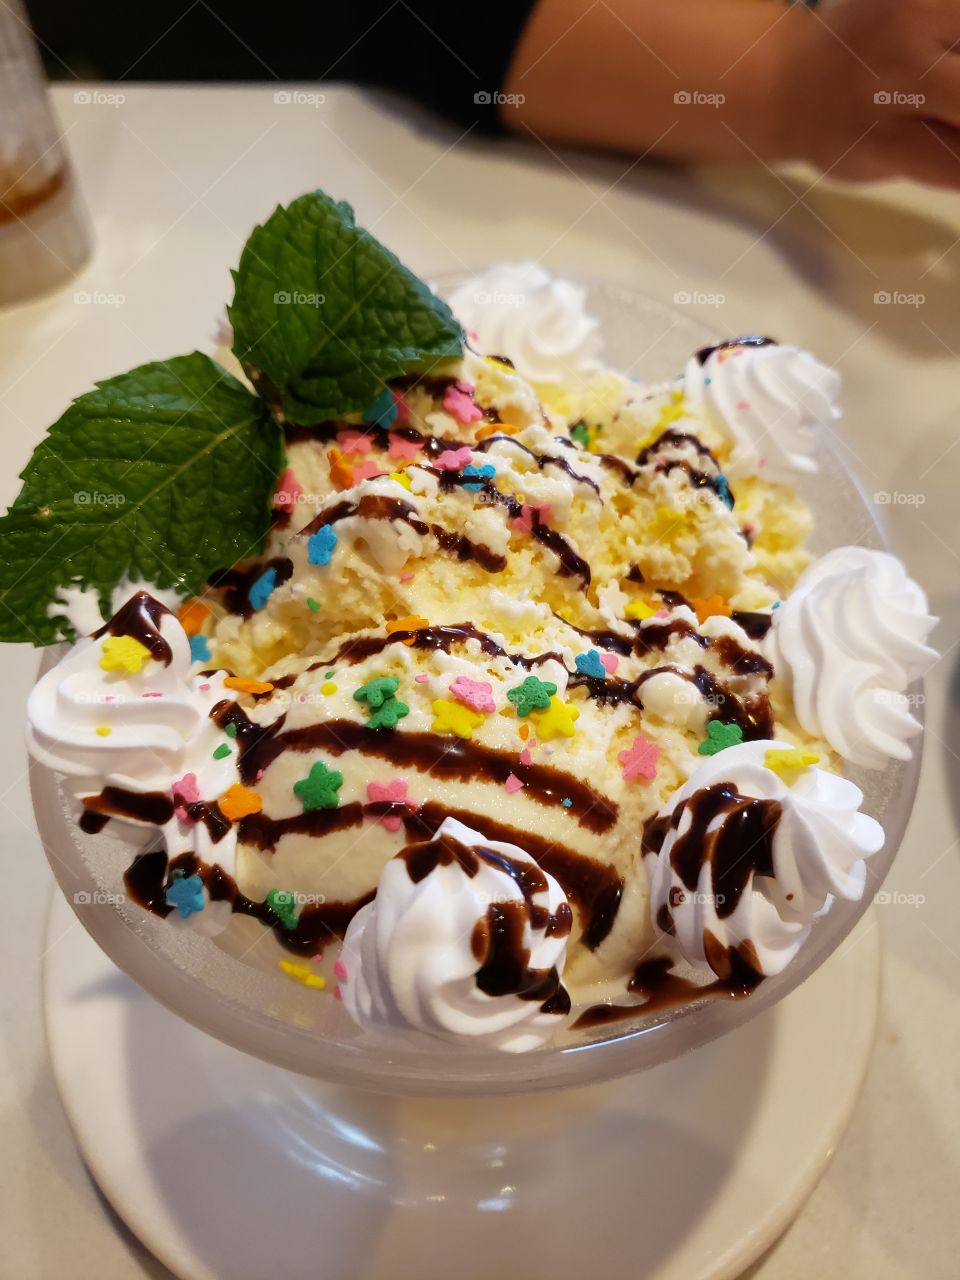 There should always be room for a sundae!